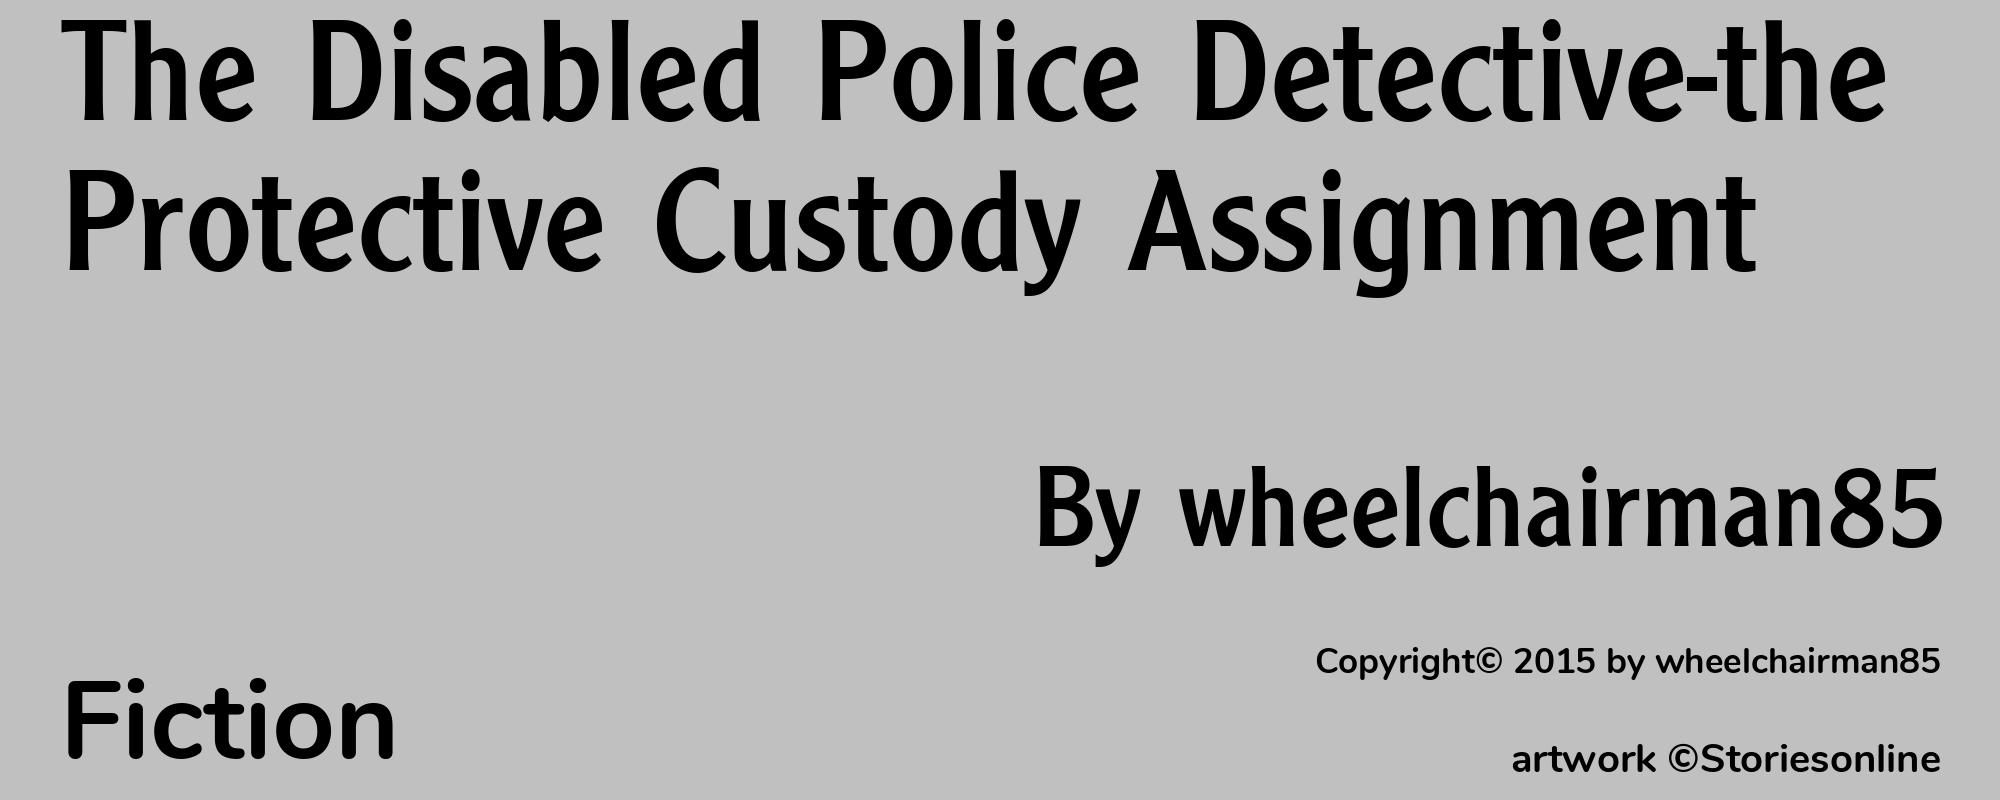 The Disabled Police Detective-the Protective Custody Assignment - Cover